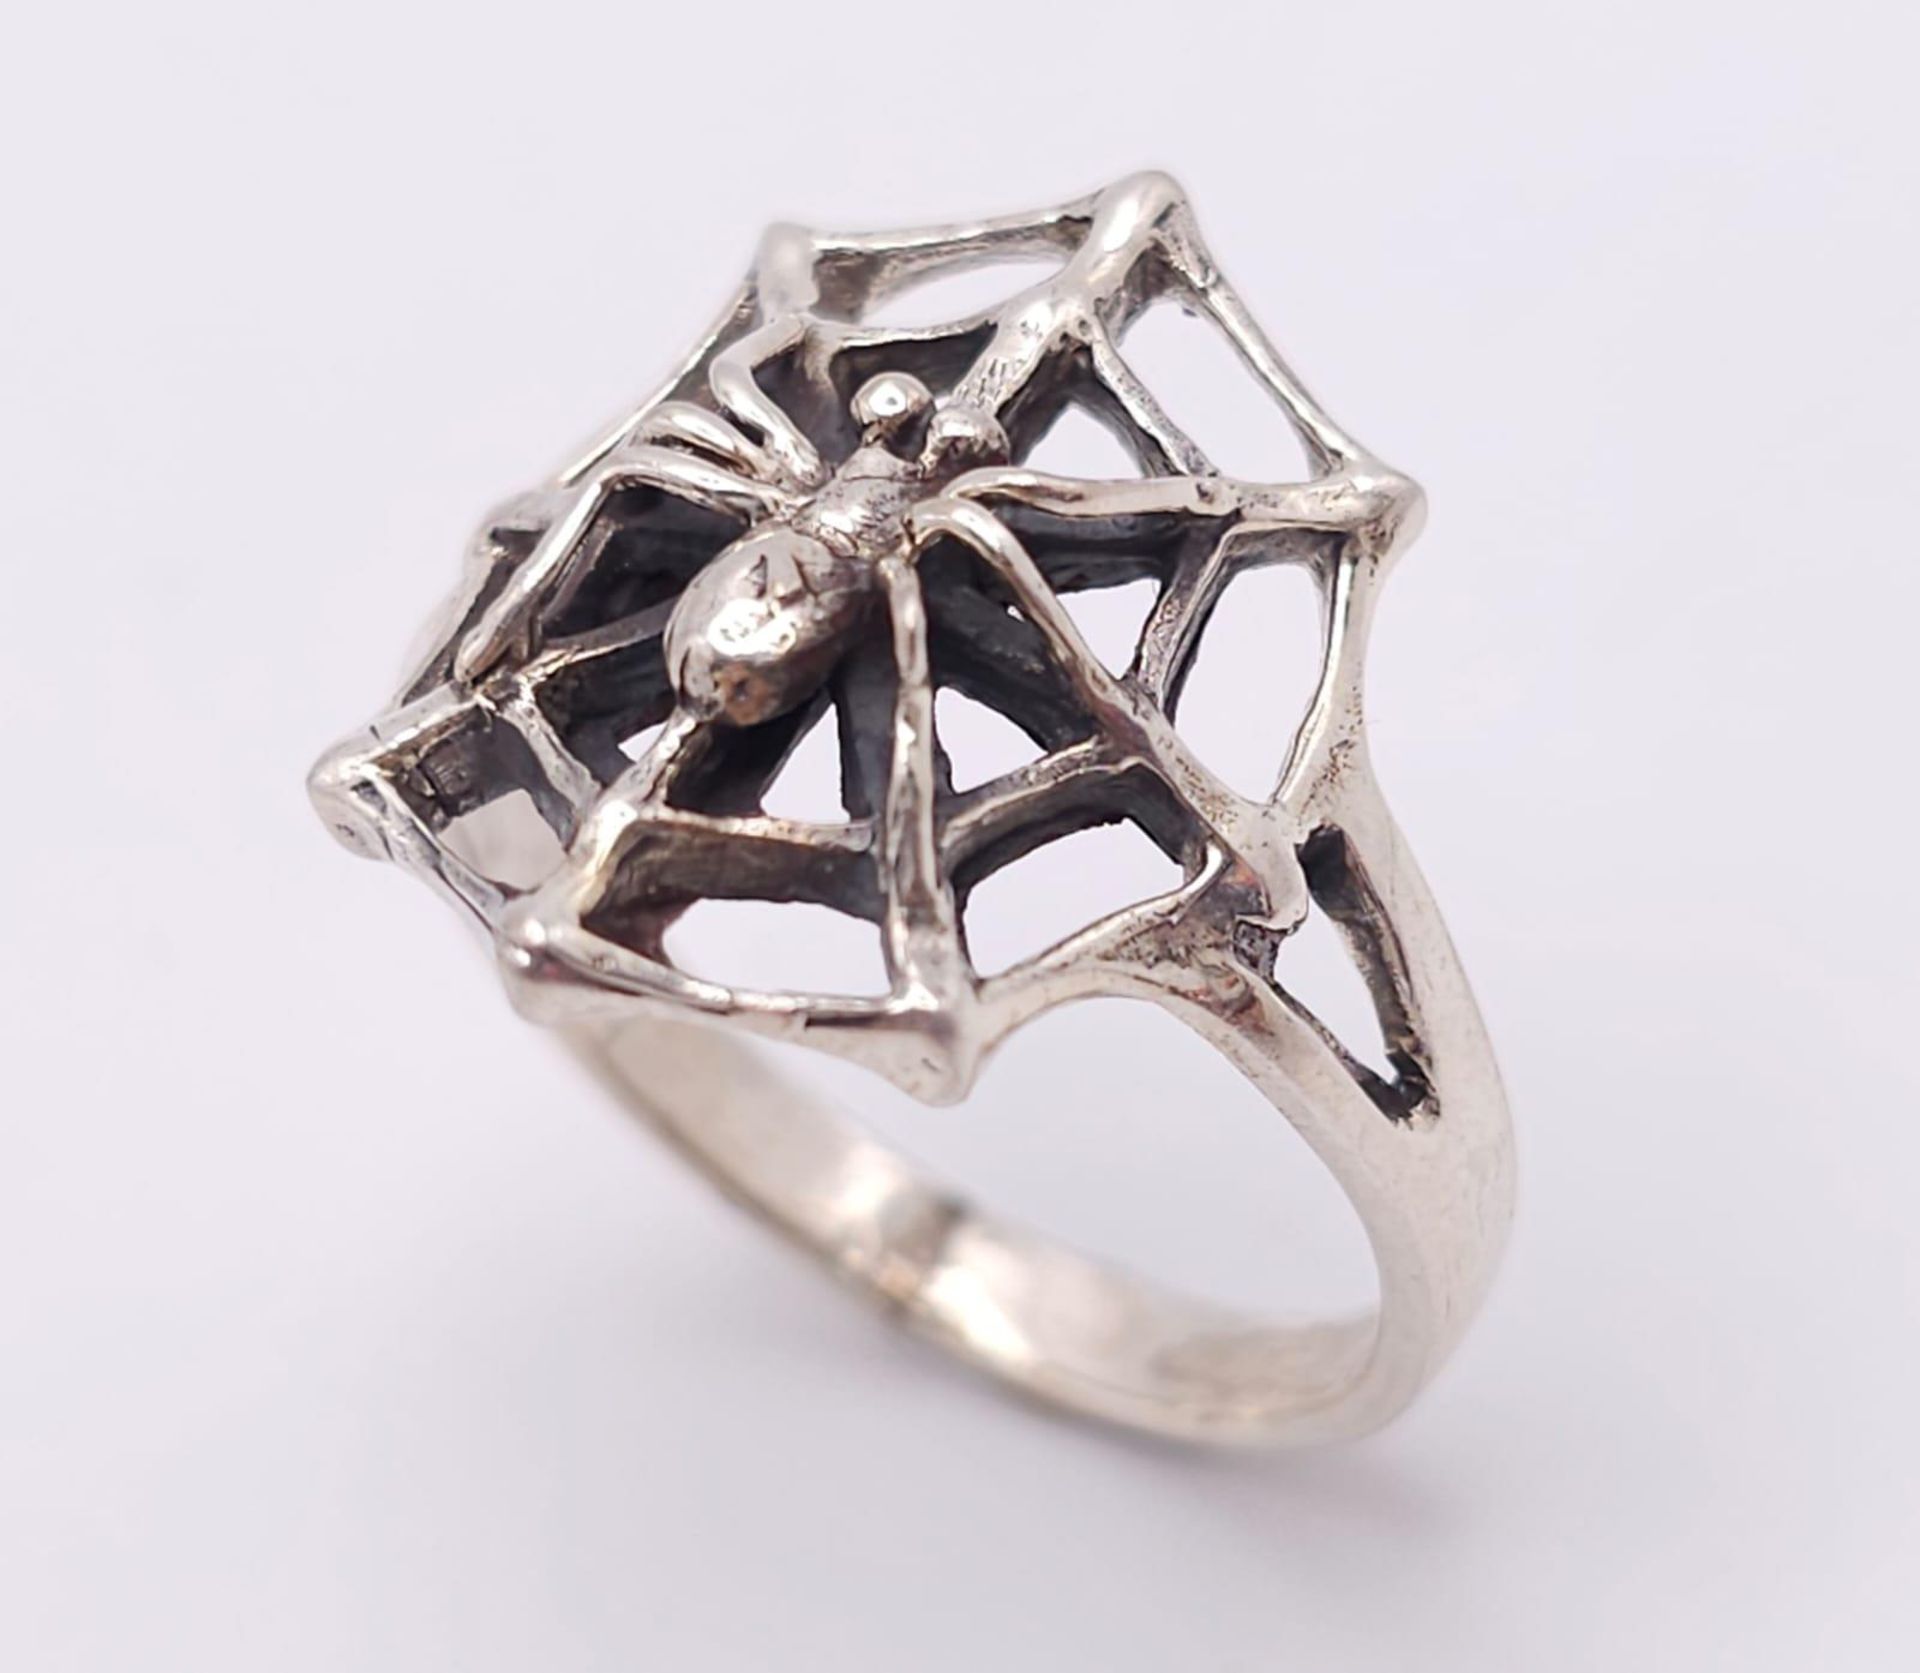 A Unique Vintage Sterling Silver Spider and Spider Web Ring Size Q. The Crown Measures 2cm Long - Image 3 of 9